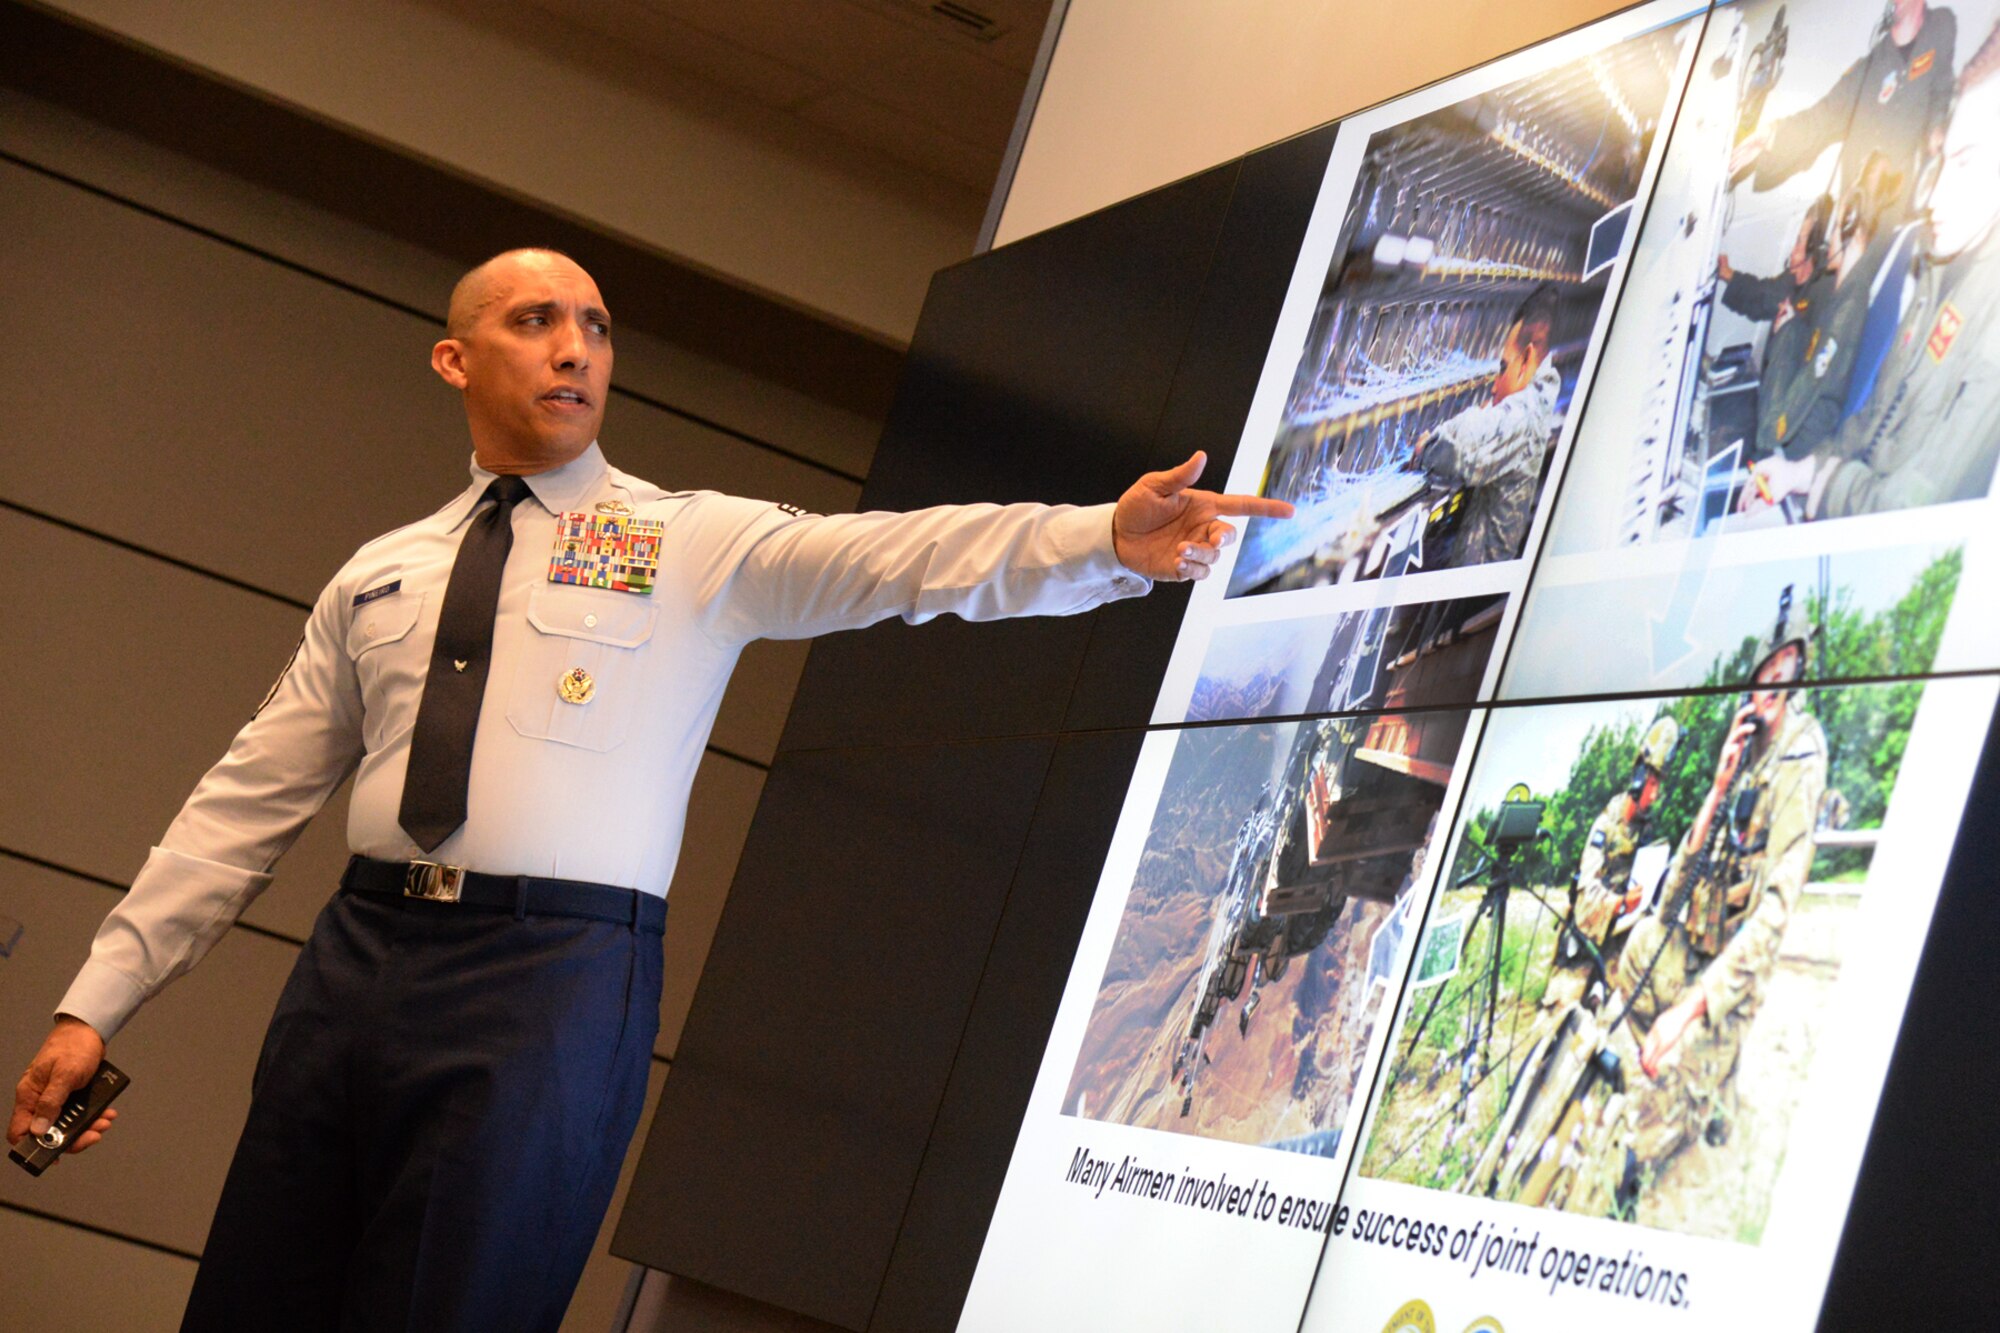 Chief Master Sgt. Manny Pineiro, Air Force District of Washington First Sergeant, briefs the Air Force’s impact on the joint mission during the National Capital Region Joint Professional Development Seminar in Washington D.C. on Nov. 30, 2016. The seminar was held at the National Defense University on Ft. McNair and helps NCOs develop skills to prepare them for challenges they may face filling joint mission requirements. (U.S. Air Force photo/Tech. Sgt. Matt Davis)